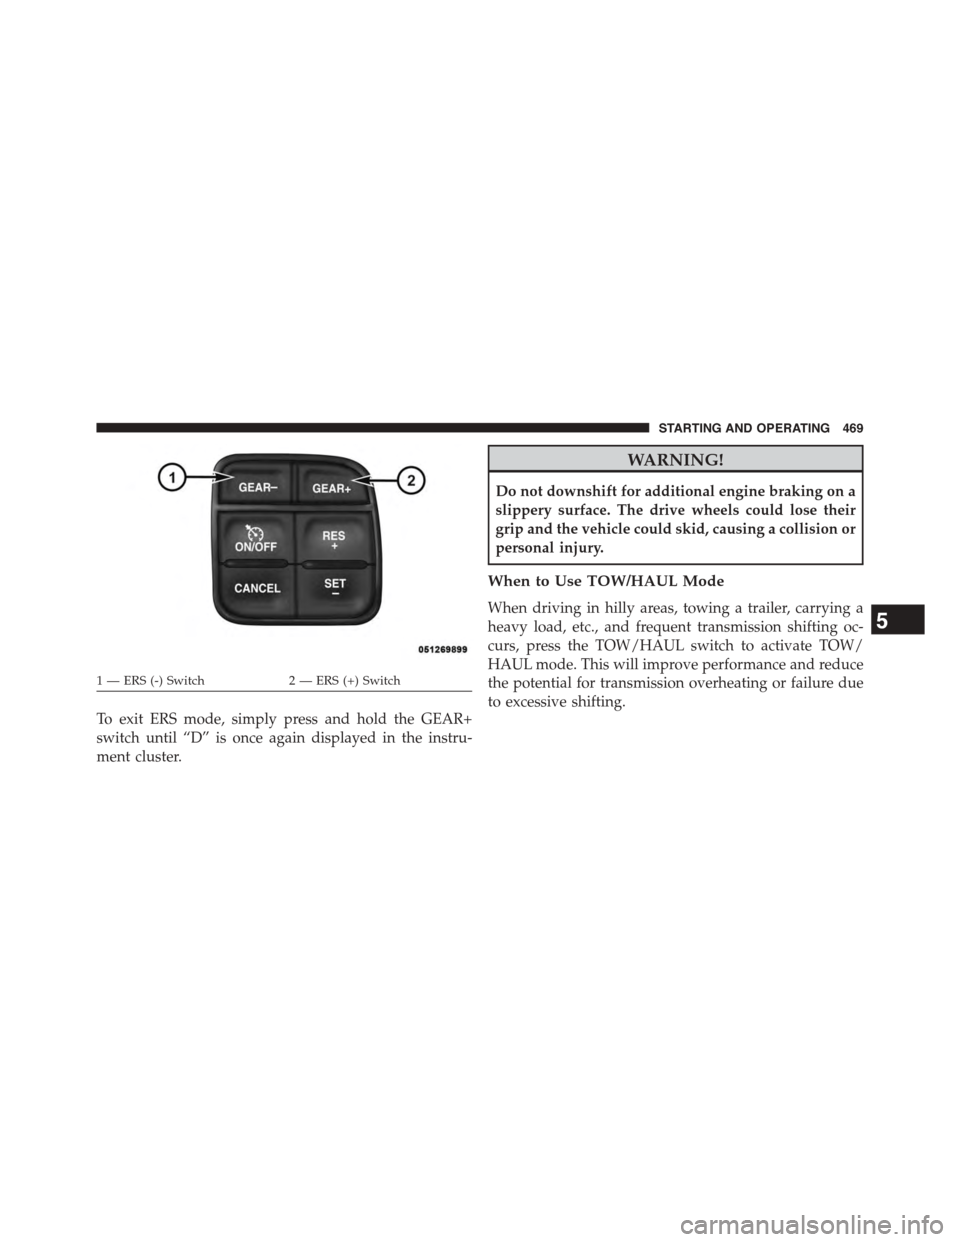 Ram 1500 2015  Owners Manual To exit ERS mode, simply press and hold the GEAR+
switch until “D” is once again displayed in the instru-
ment cluster.
WARNING!
Do not downshift for additional engine braking on a
slippery surfac